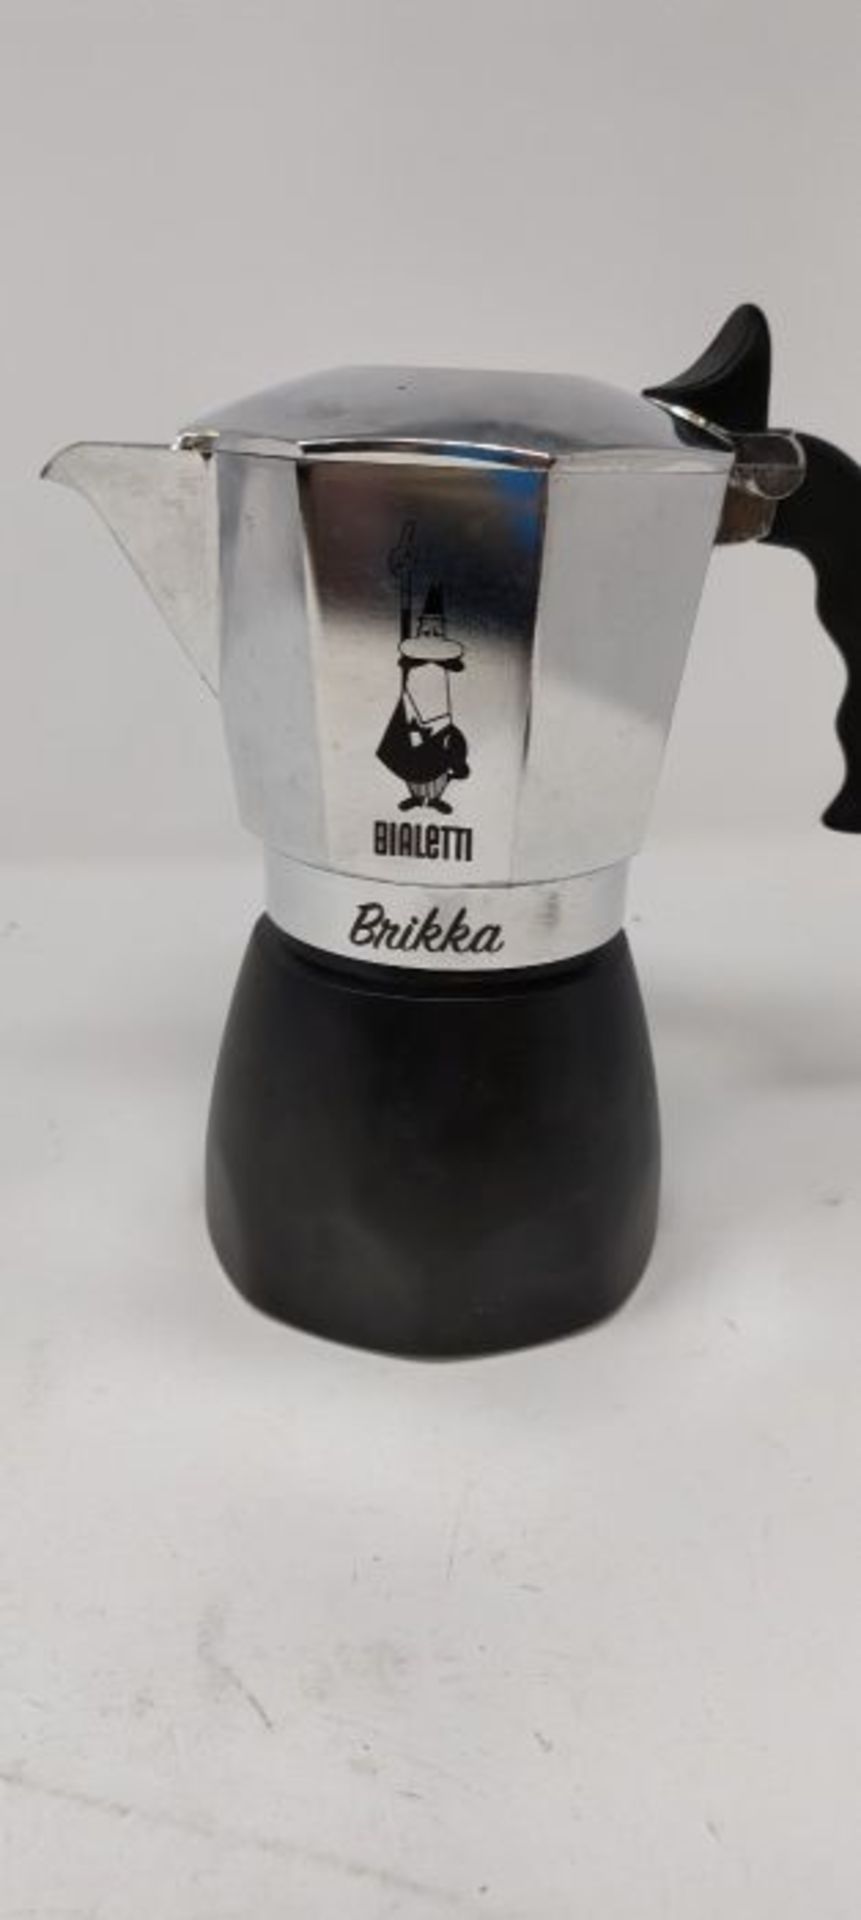 Bialetti New Brikka Aluminium Coffee Maker with Double Cream 4 Cups - Image 3 of 3